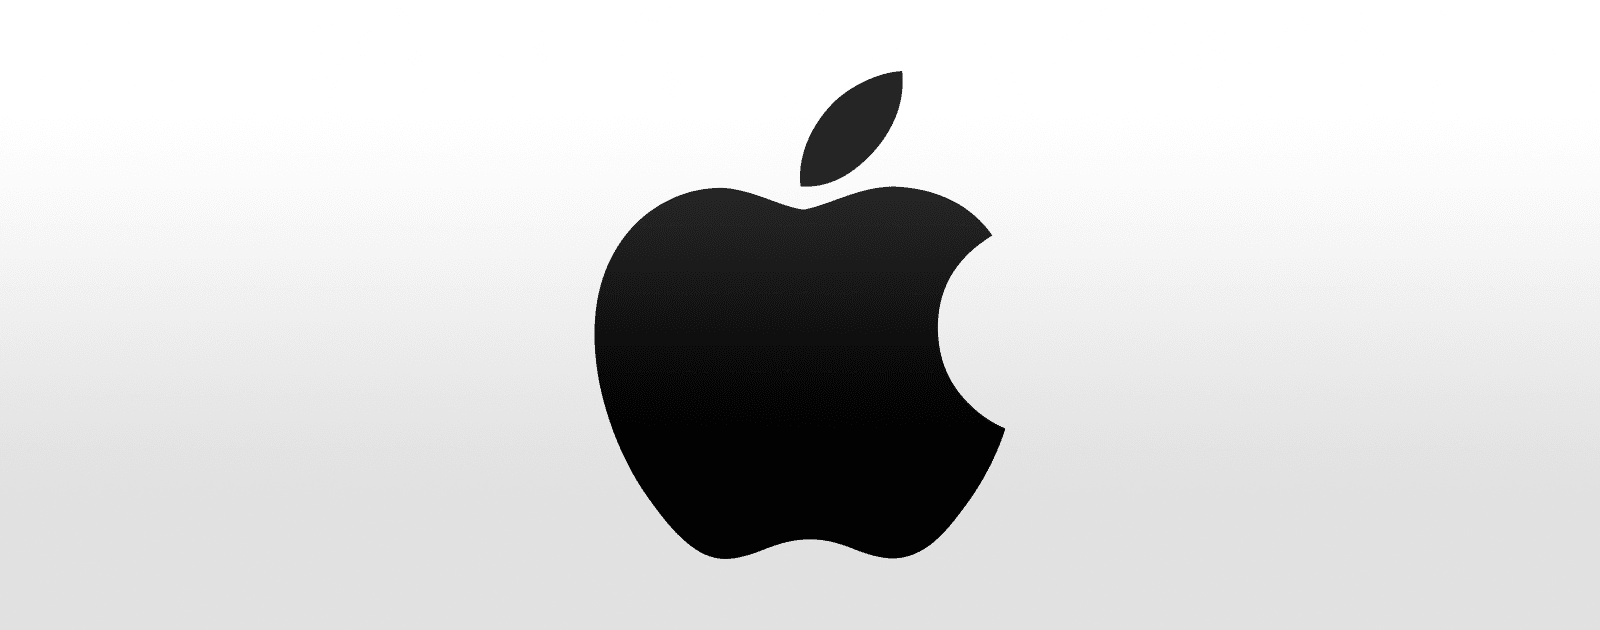 Future Apple Logo - Apple's Future With Hardware, Software, and Services - The Mac Observer